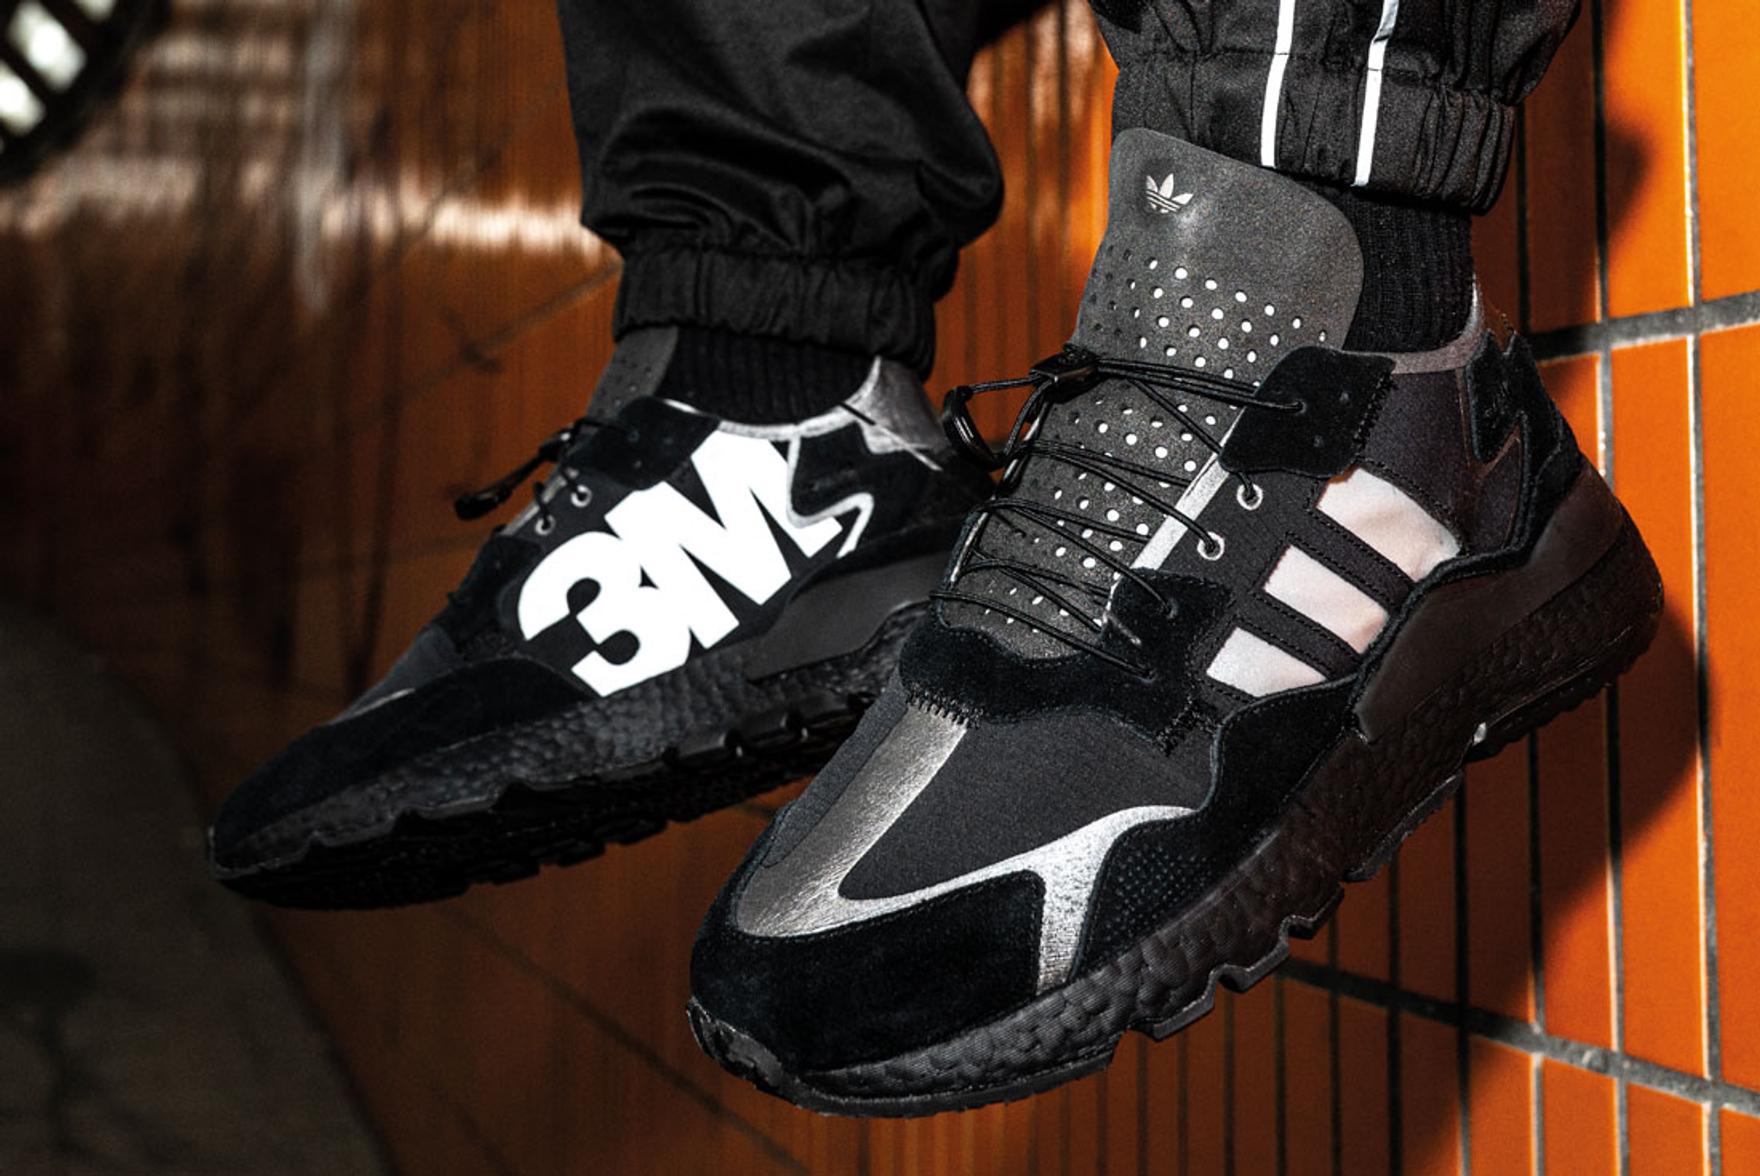 Reflecting on adidas and 3M’s Nite Jogger Heritage